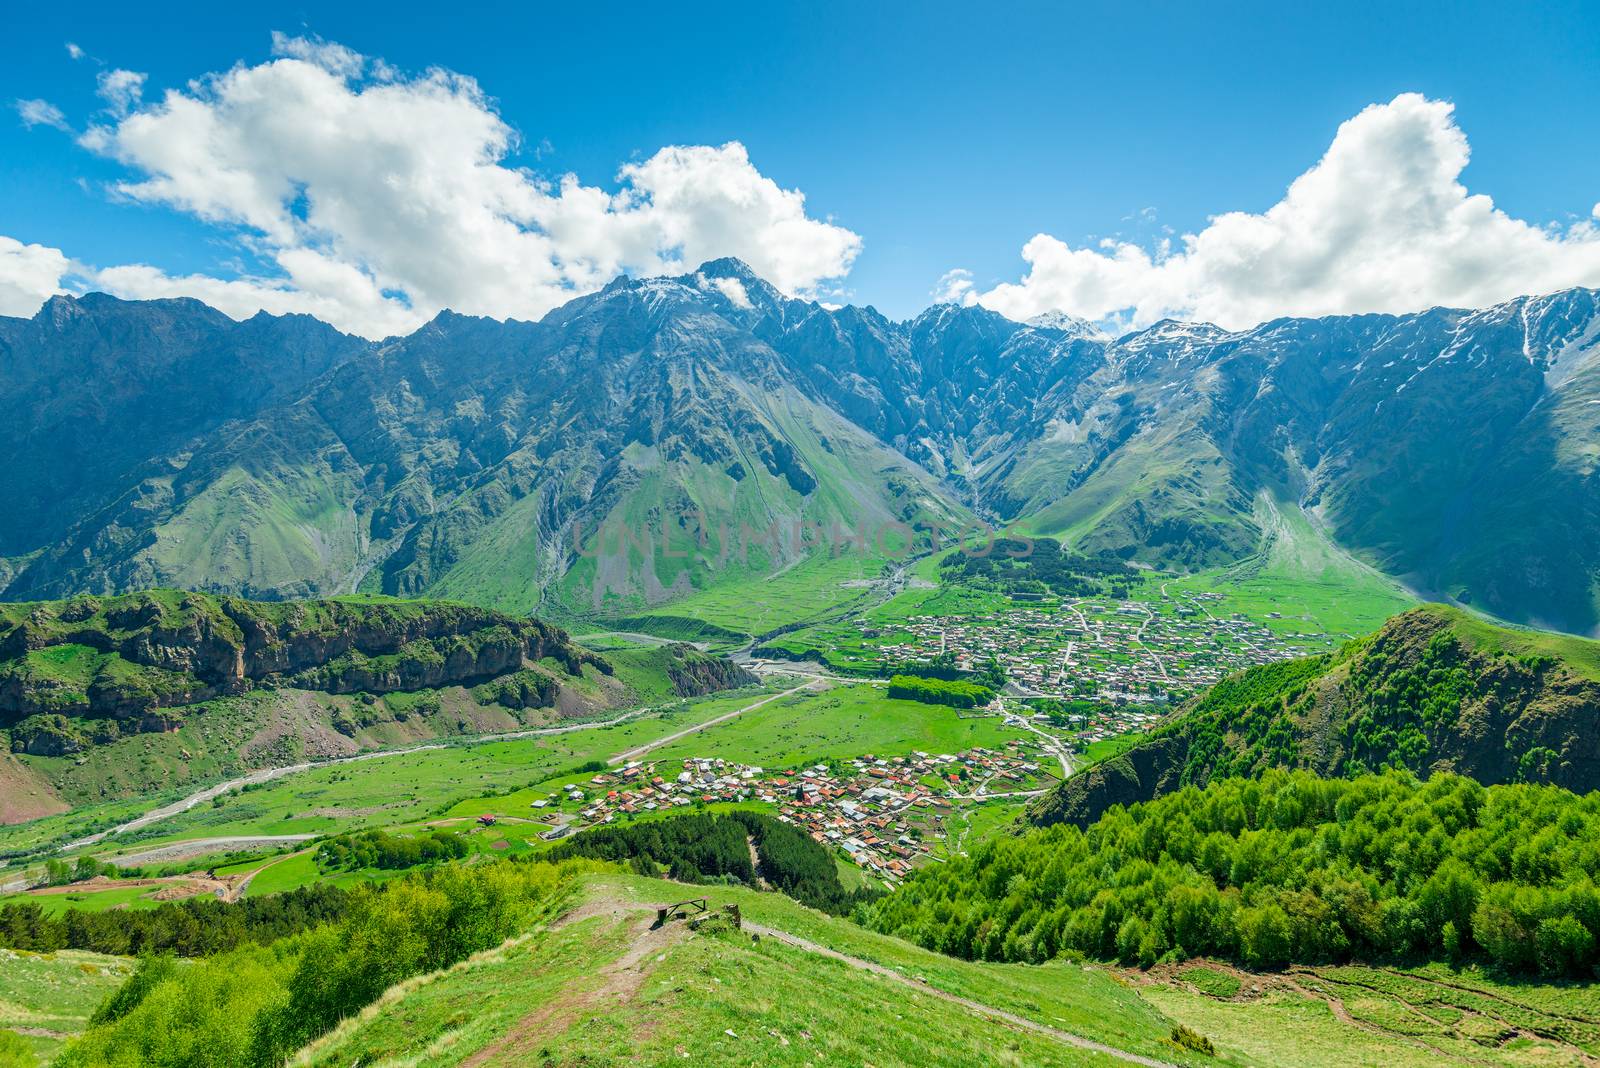 The village of Gergeti in the valley of the Caucasus in Georgia by kosmsos111